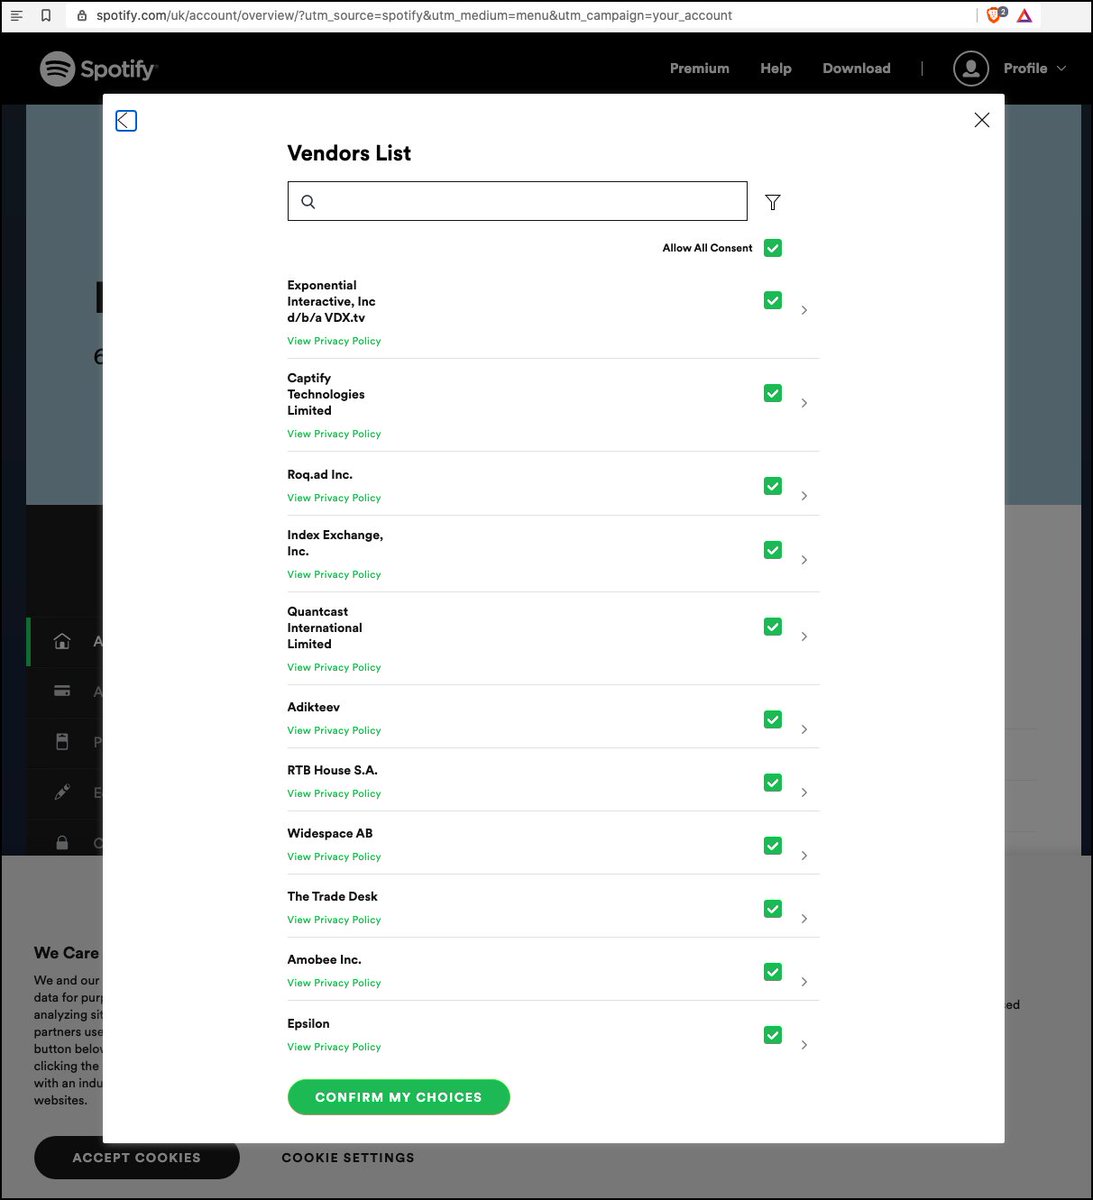 There are 218 Third Party Vendors (each with their own privacy policy) defaulted to ON via pre-ticked boxes, that includes consent, special purposes and features. Consider also, that the 'cookie' consent dialogue is presented even when visiting the Spotify Privacy Policy.